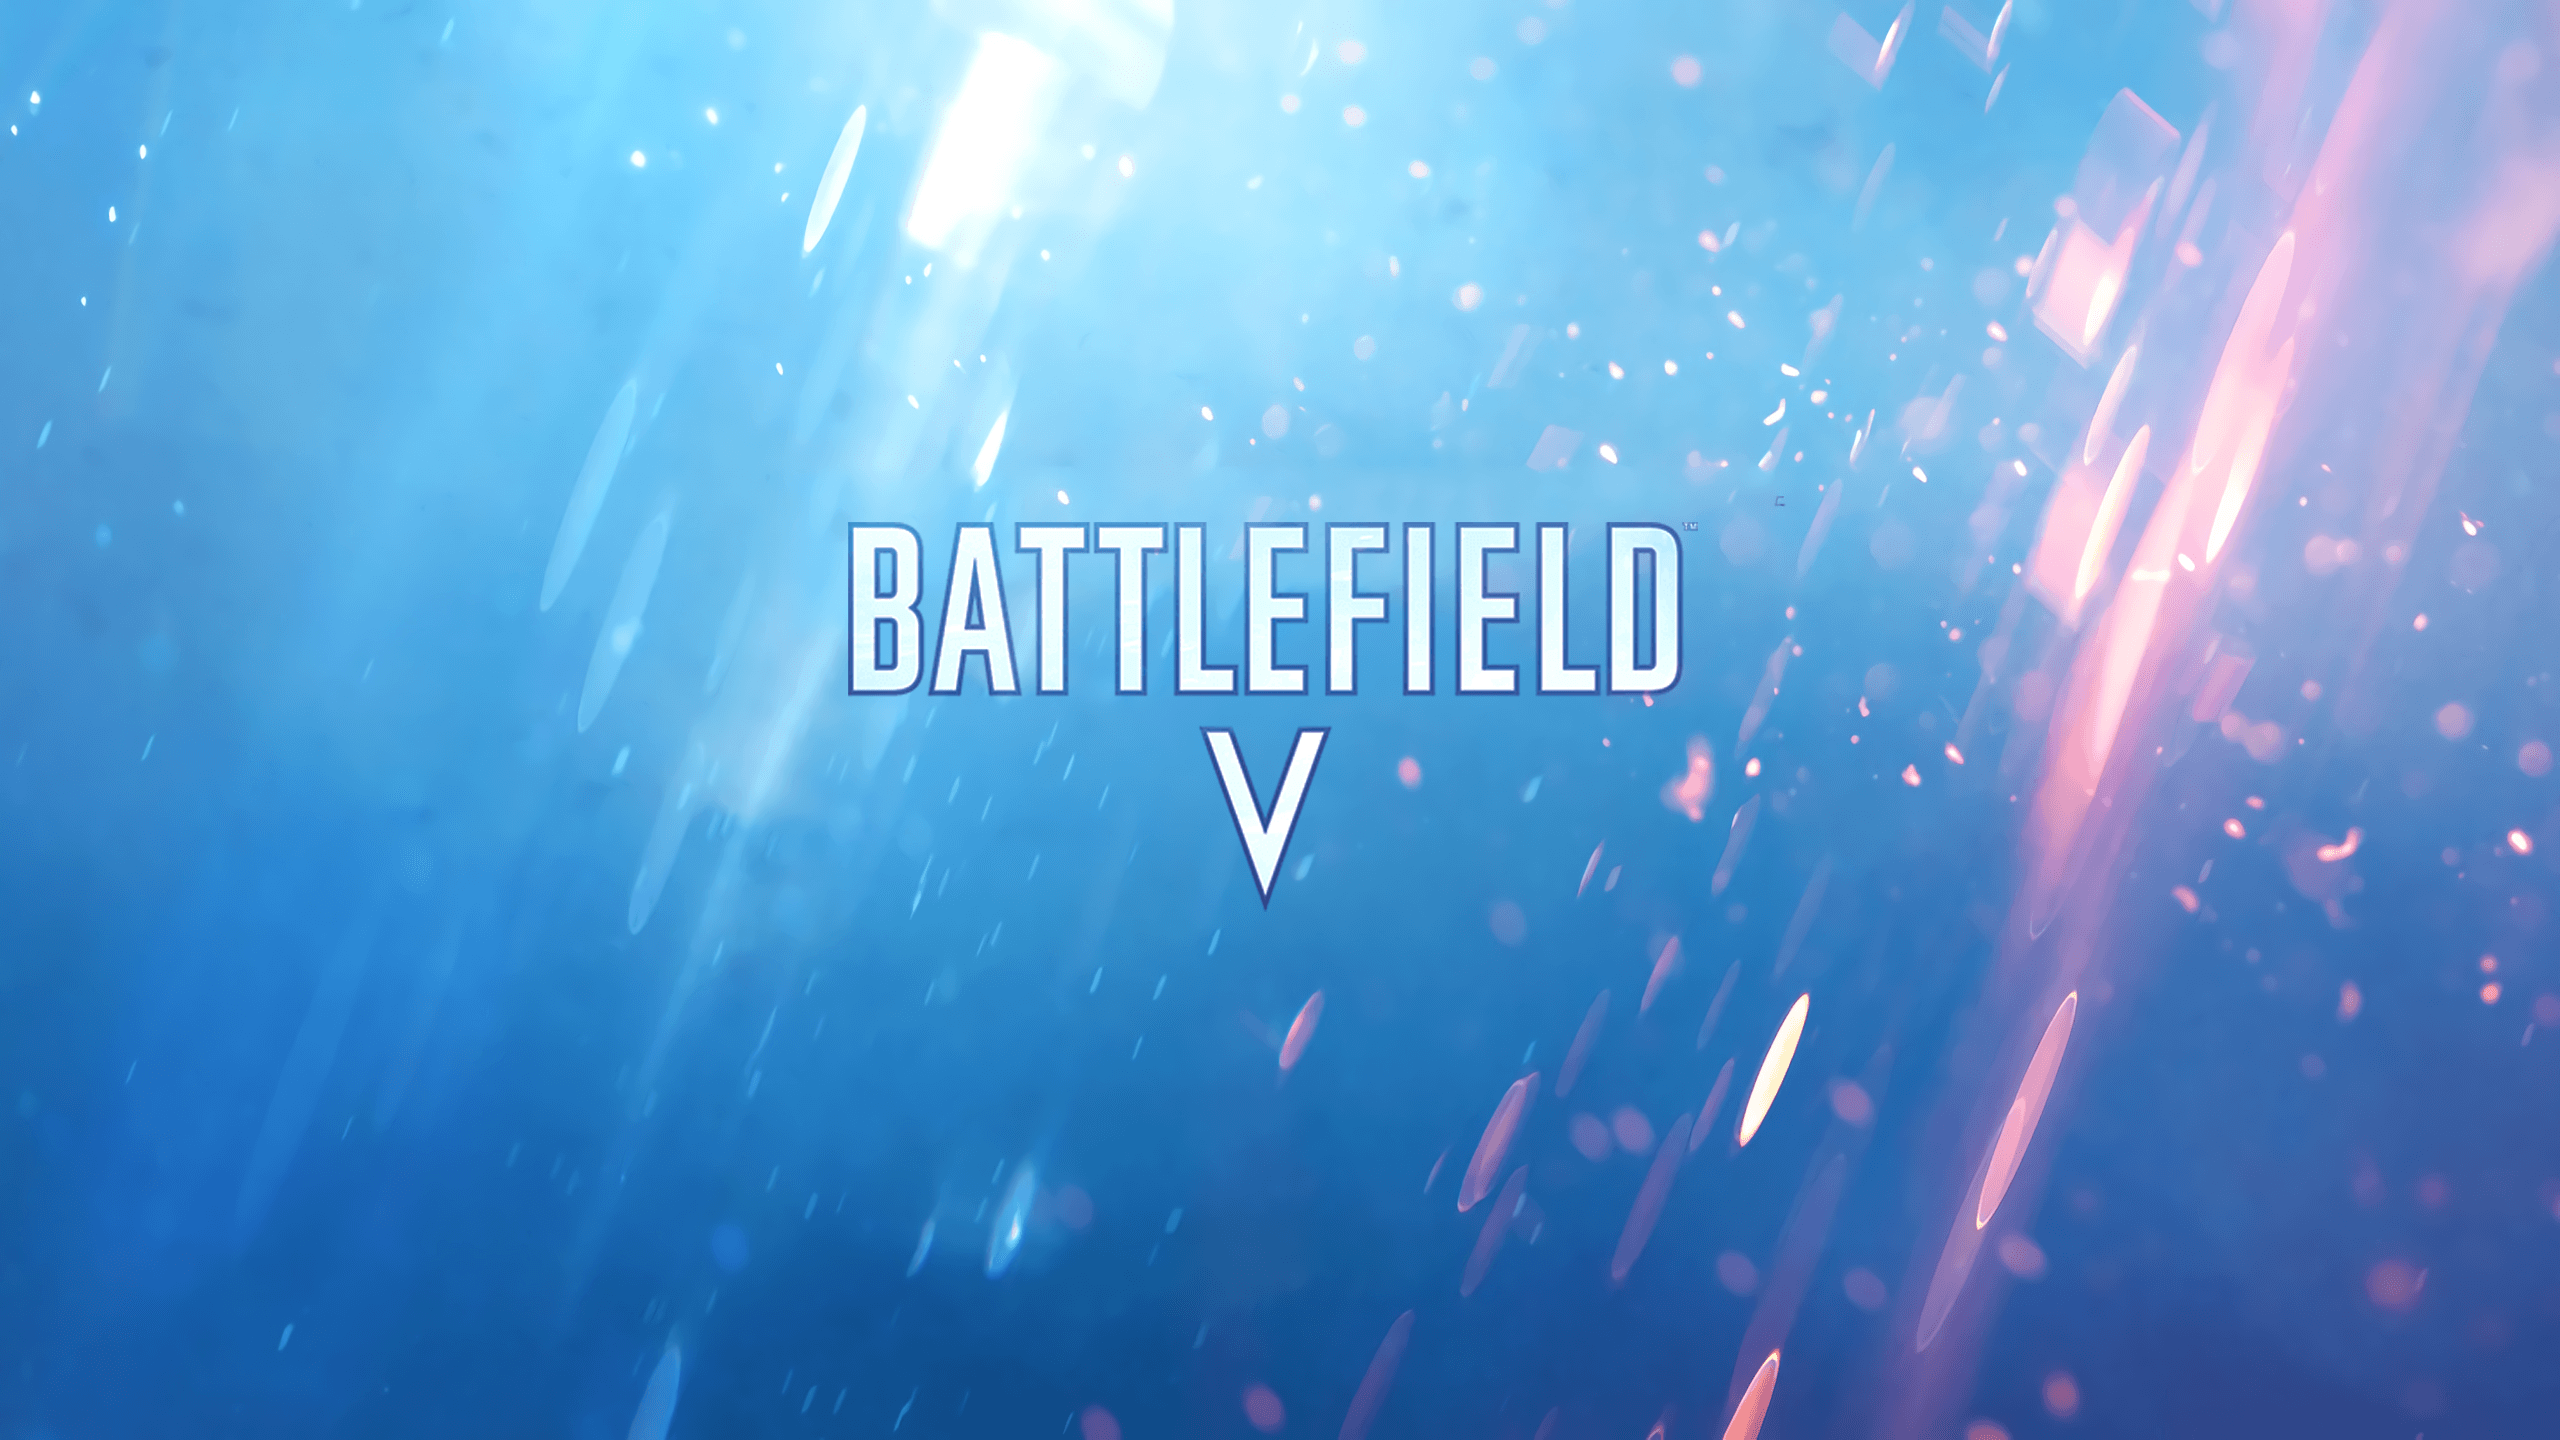 Battlefield V 4k wallpaper made from image downloaded from